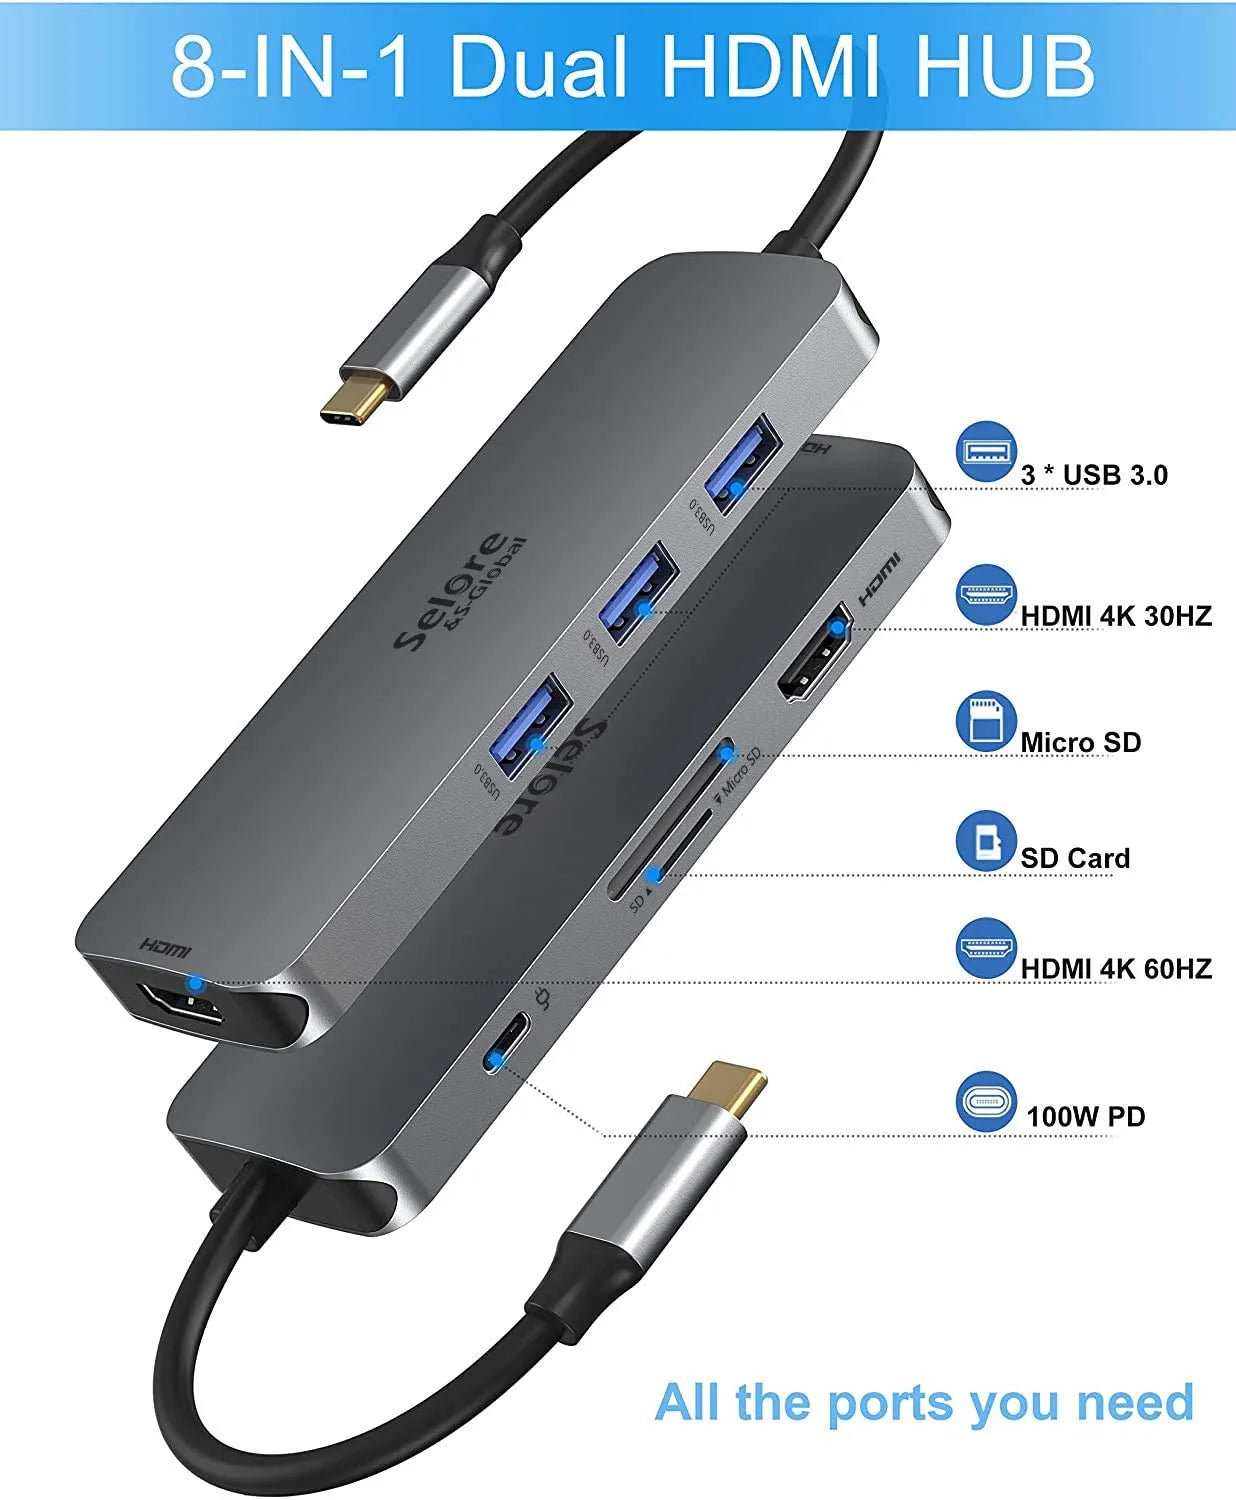 Selore USB C to Dual HDMI Adapter 8 in 1 with 3 USB A 3.0